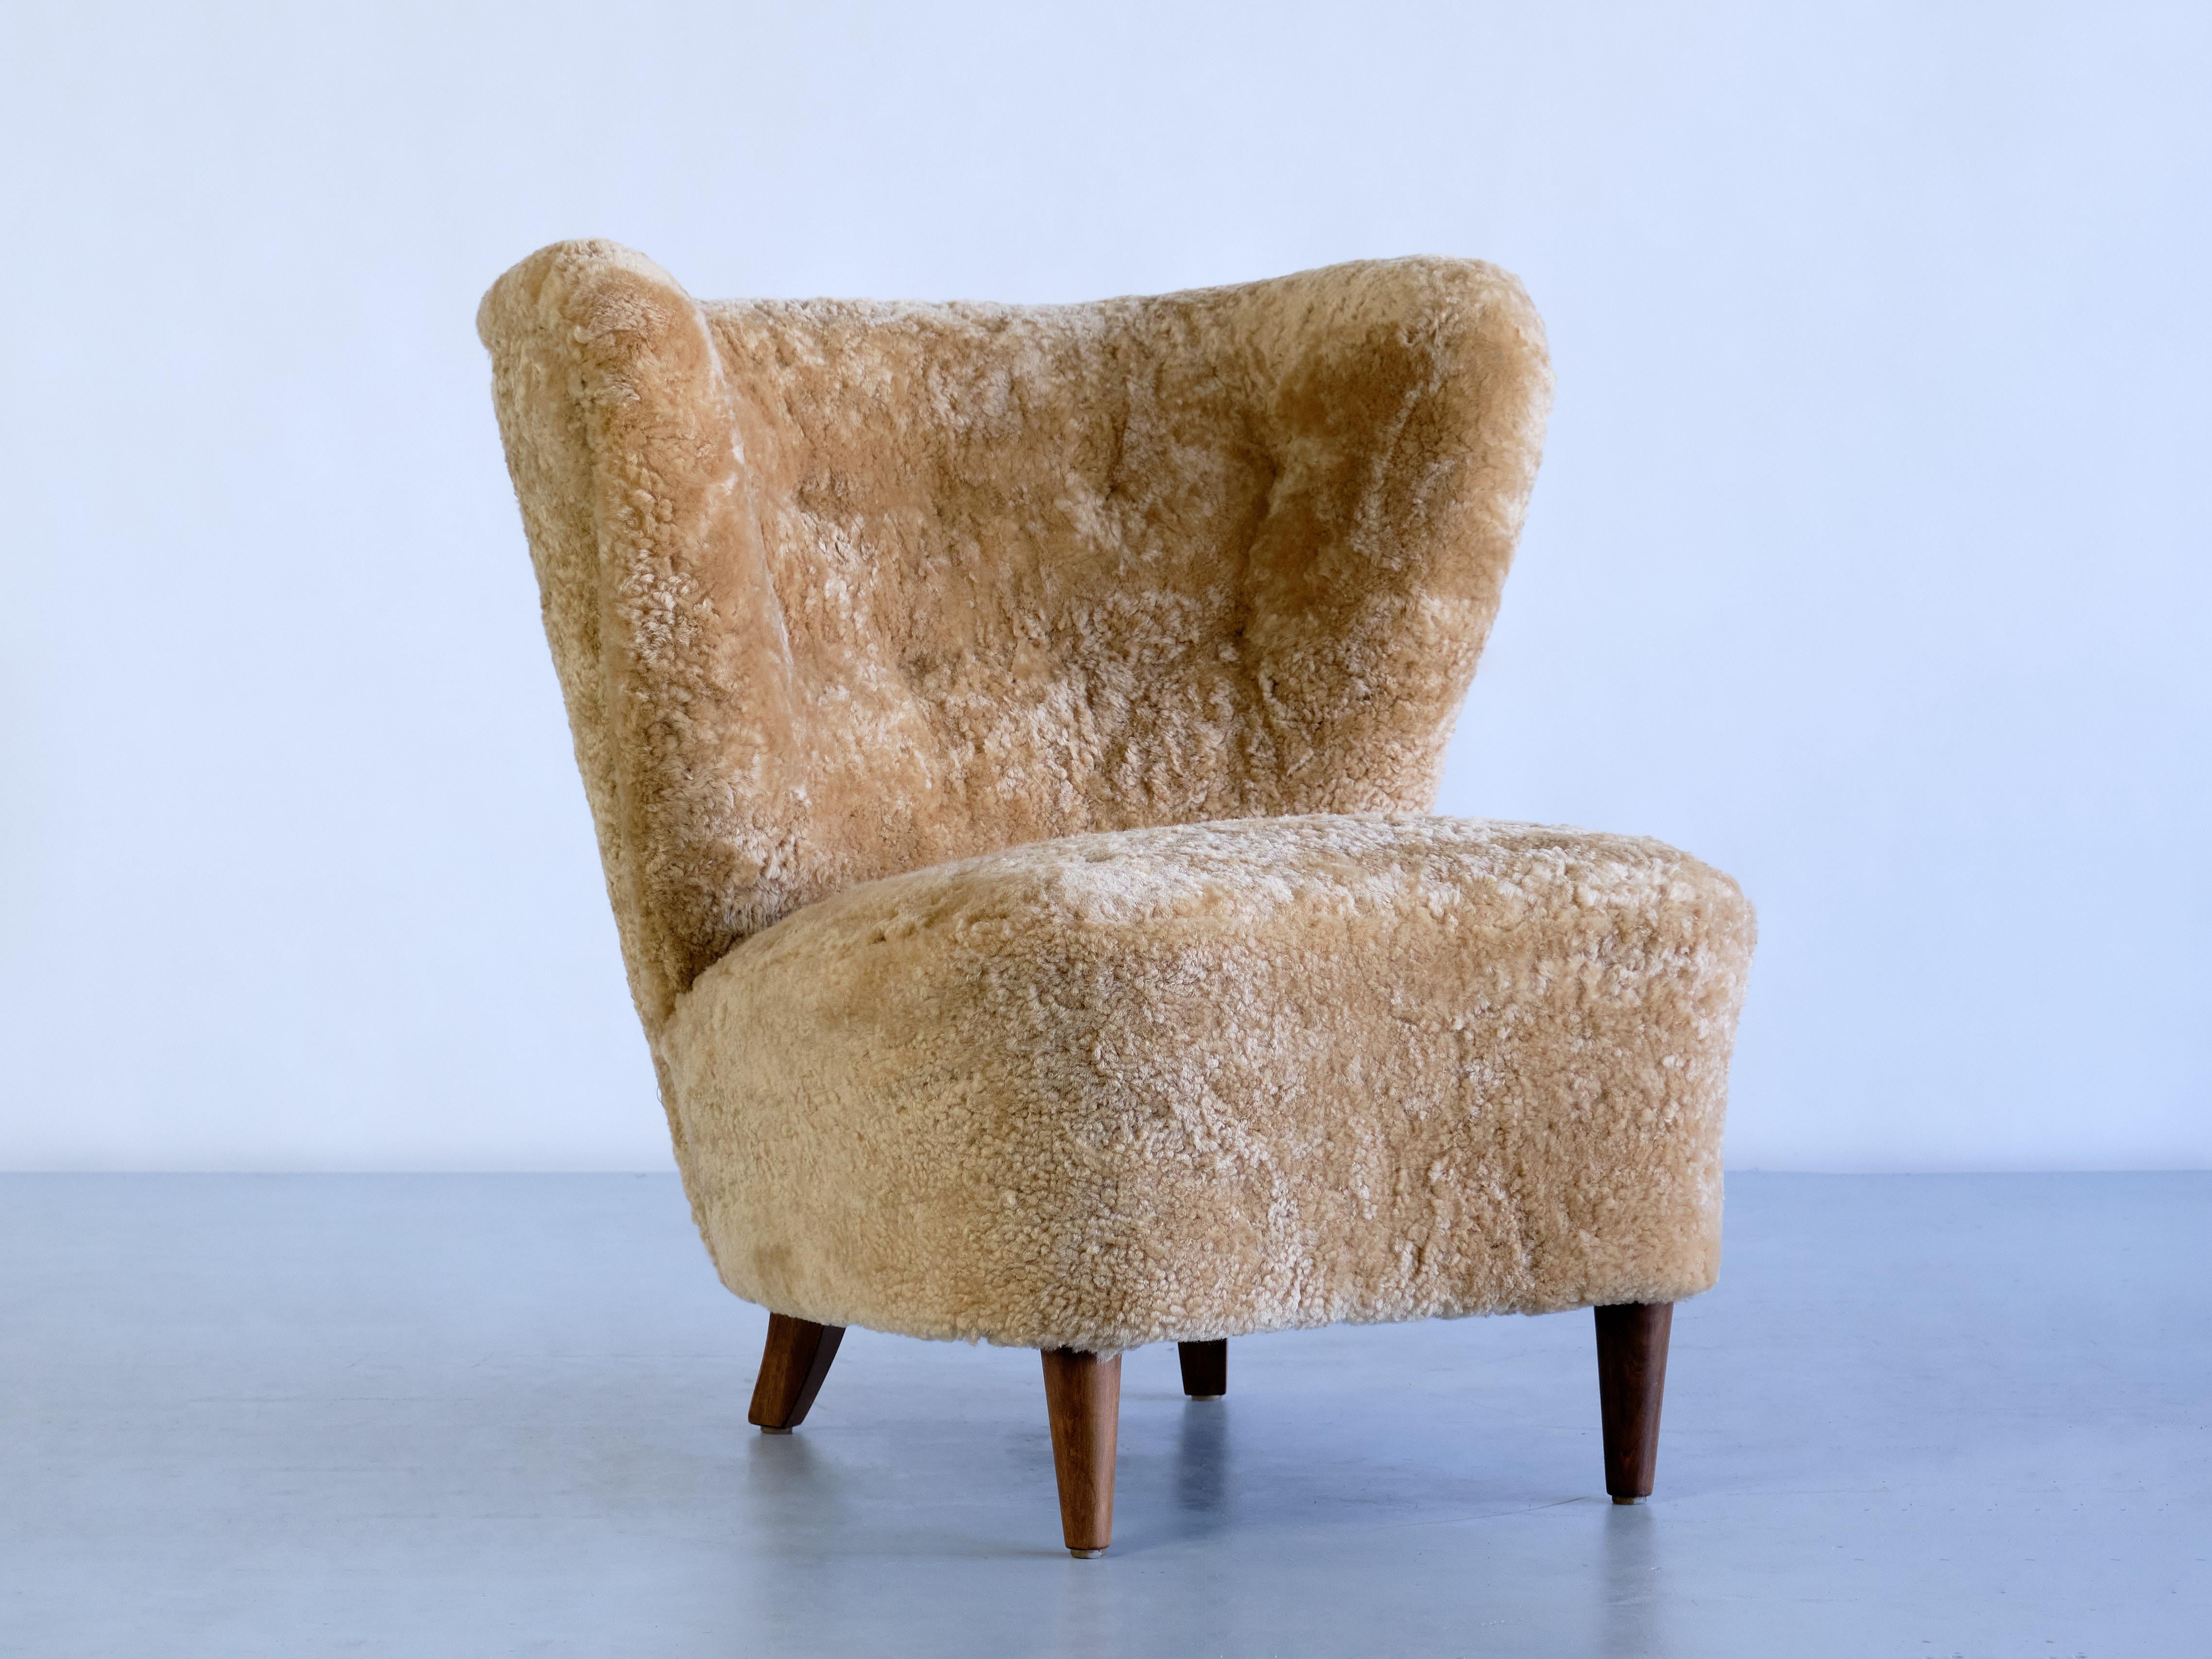 Swedish Pair of Johannes Brynte Lounge Chairs in Sheepskin and Ash Wood, Sweden, 1940s For Sale